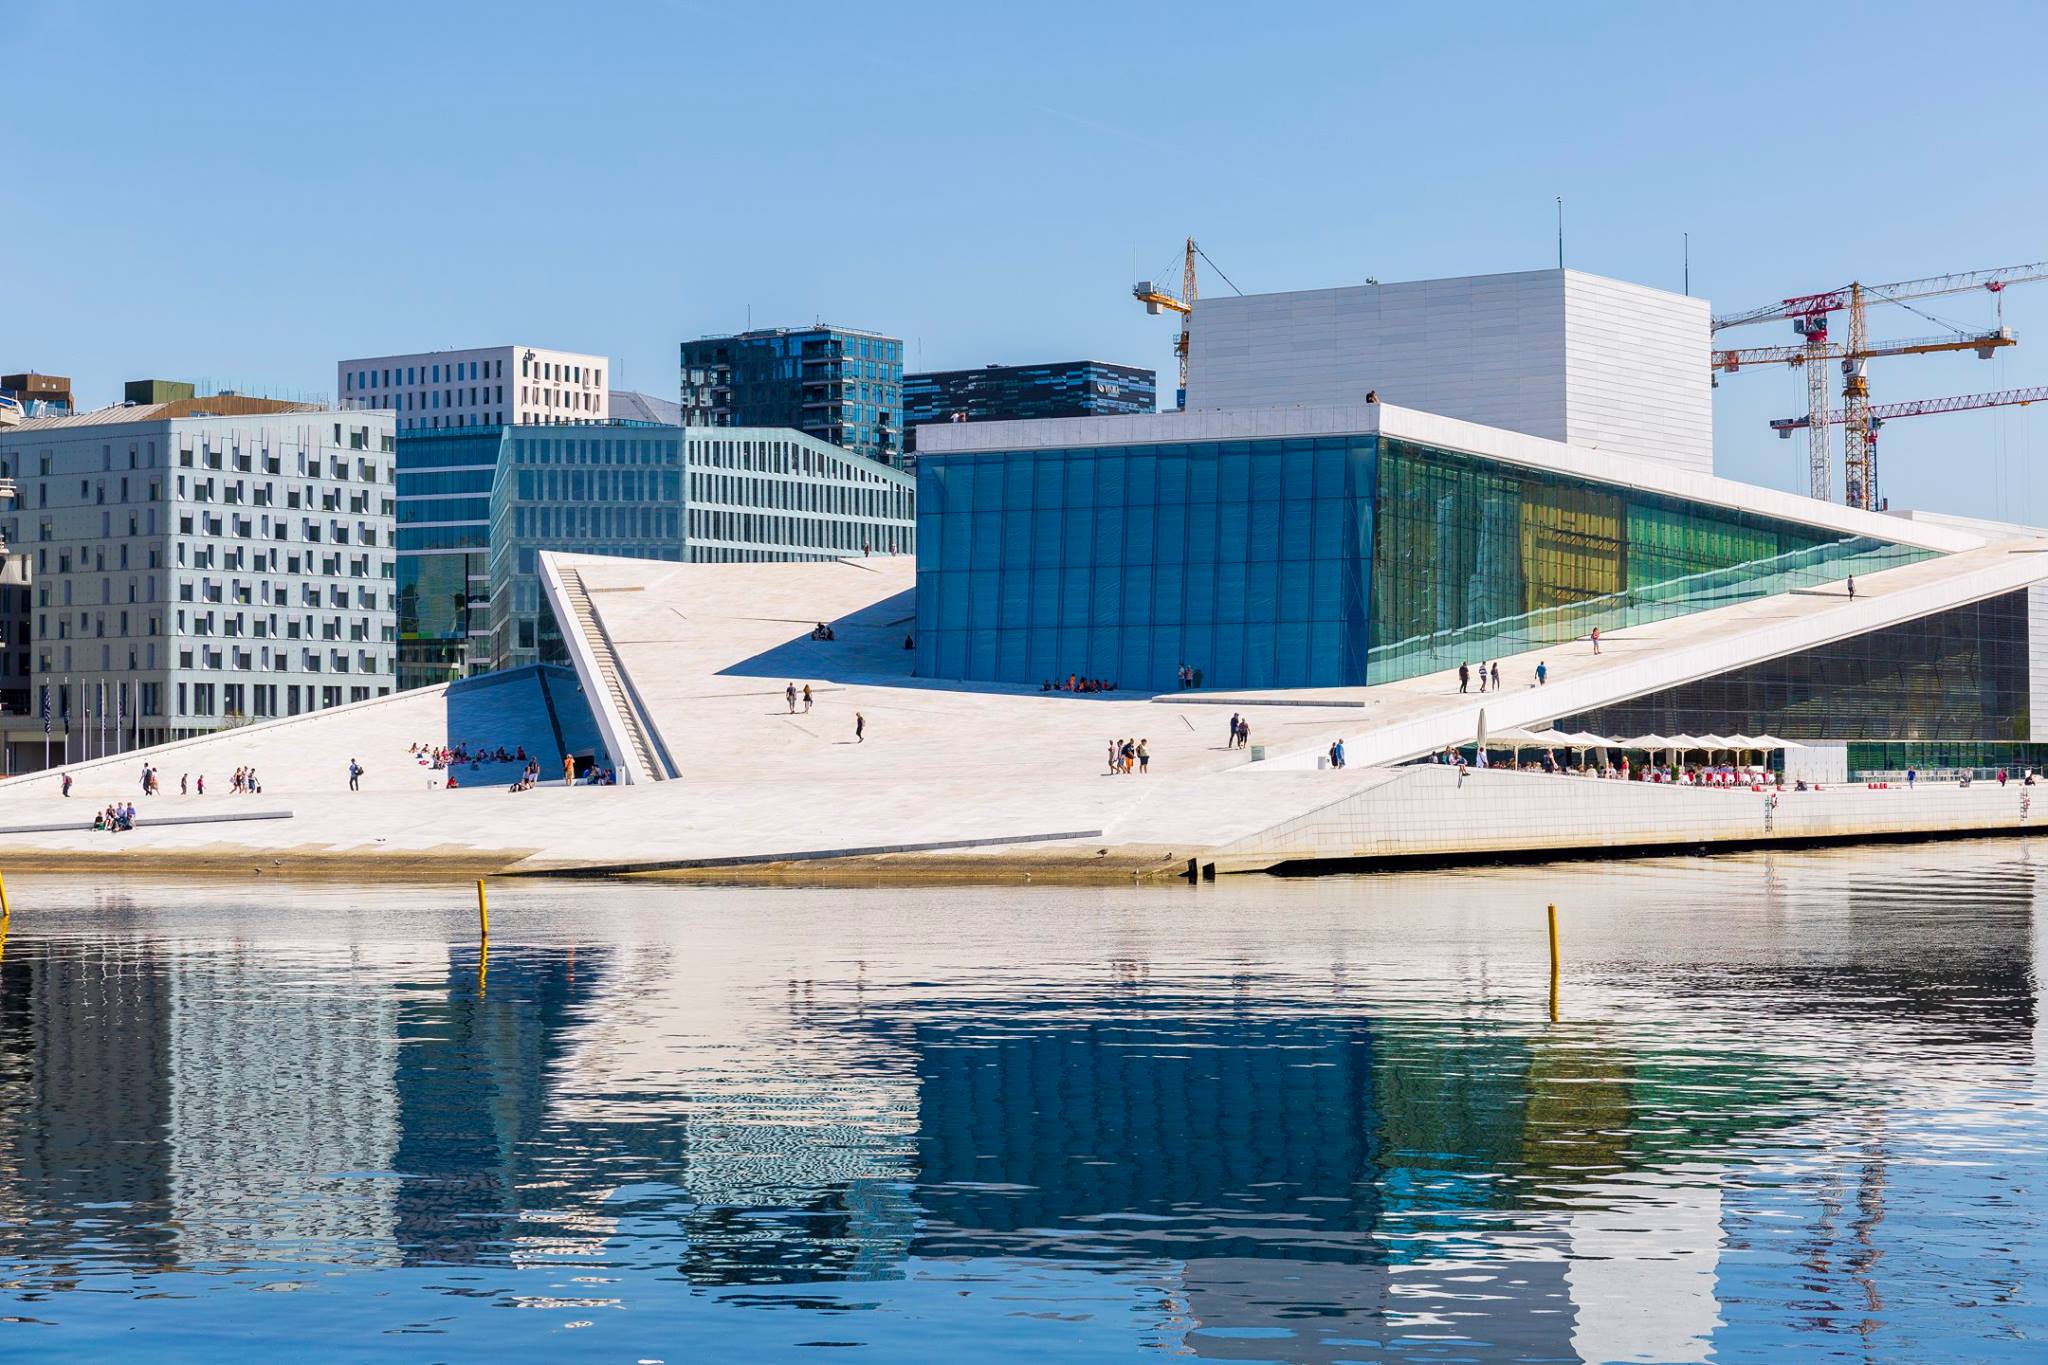 Forget Copenhagen and Stockholm, Oslo is now the home to Scandinavian cool, with new restaurants, food markets, opera houses and museums ready for the long days of summer.